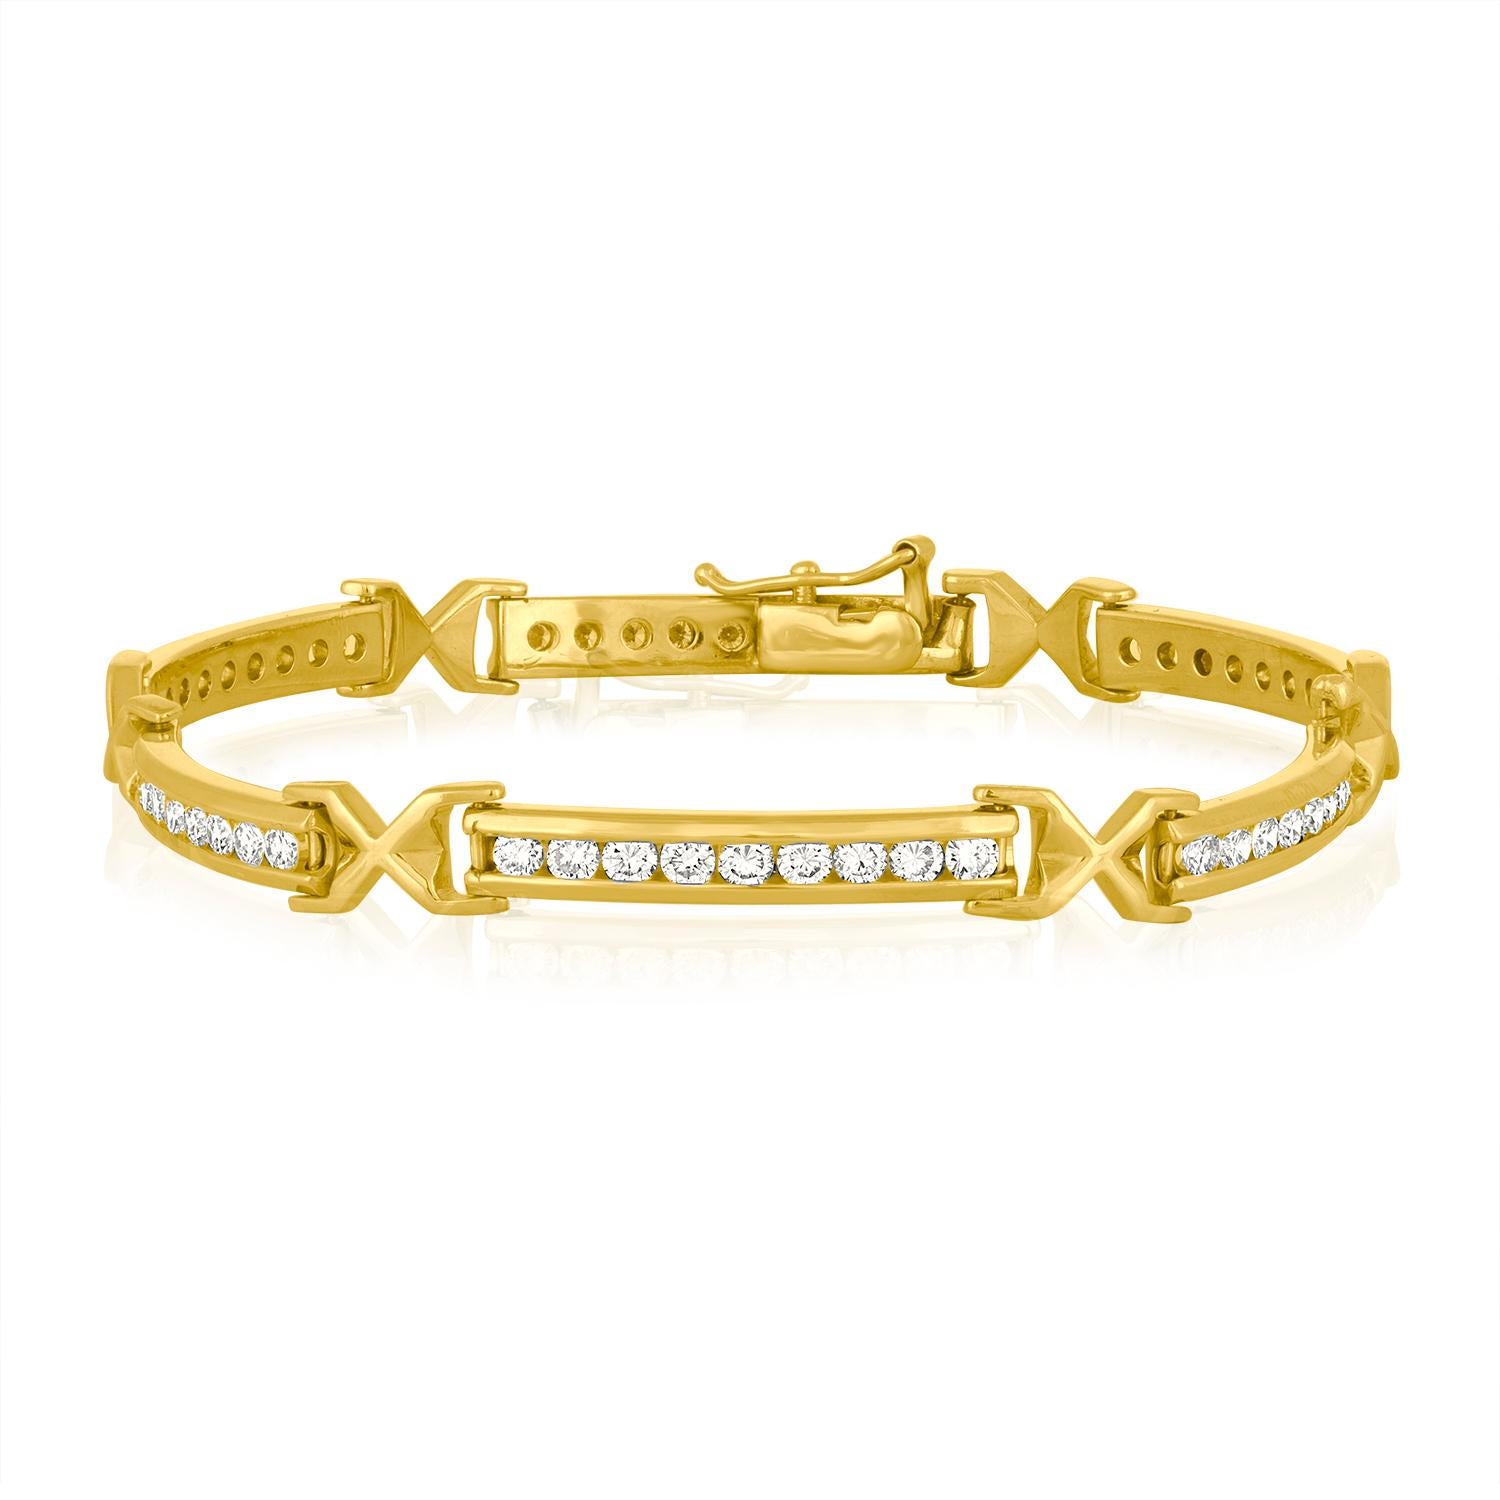 The bracelet is 14K Yellow Gold
There are 3.50 Carats In Diamonds F VS
There are 54 stones
Each stone is 0.06 Carats
The bracelet weighs 13.7 grams
The bracelet is 7.25